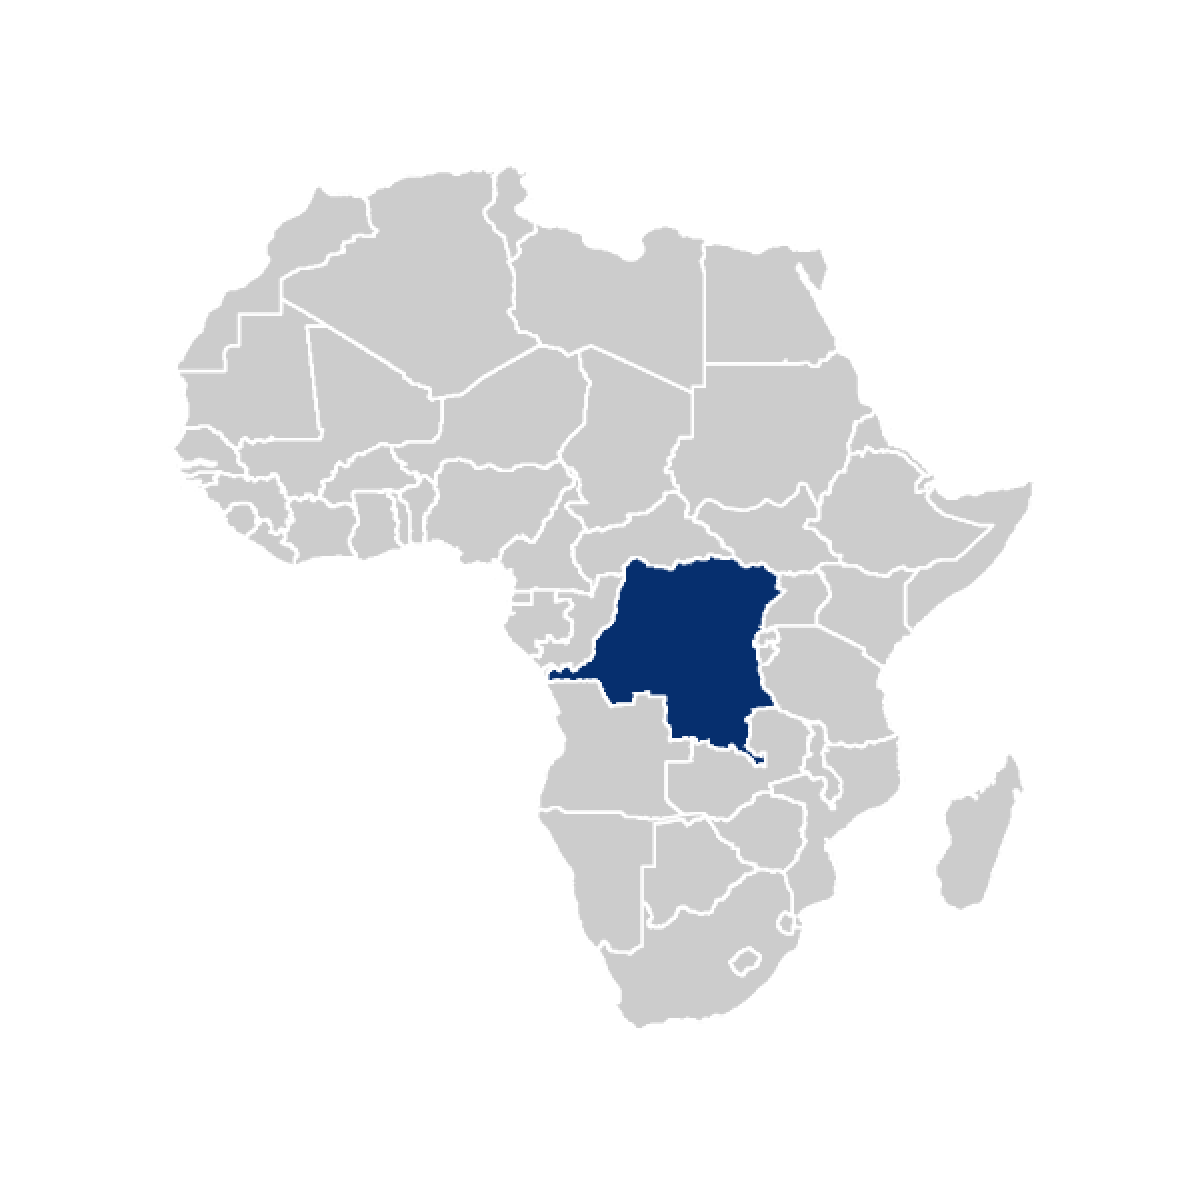 Democratic Republic of Congo highlighted on Africa map